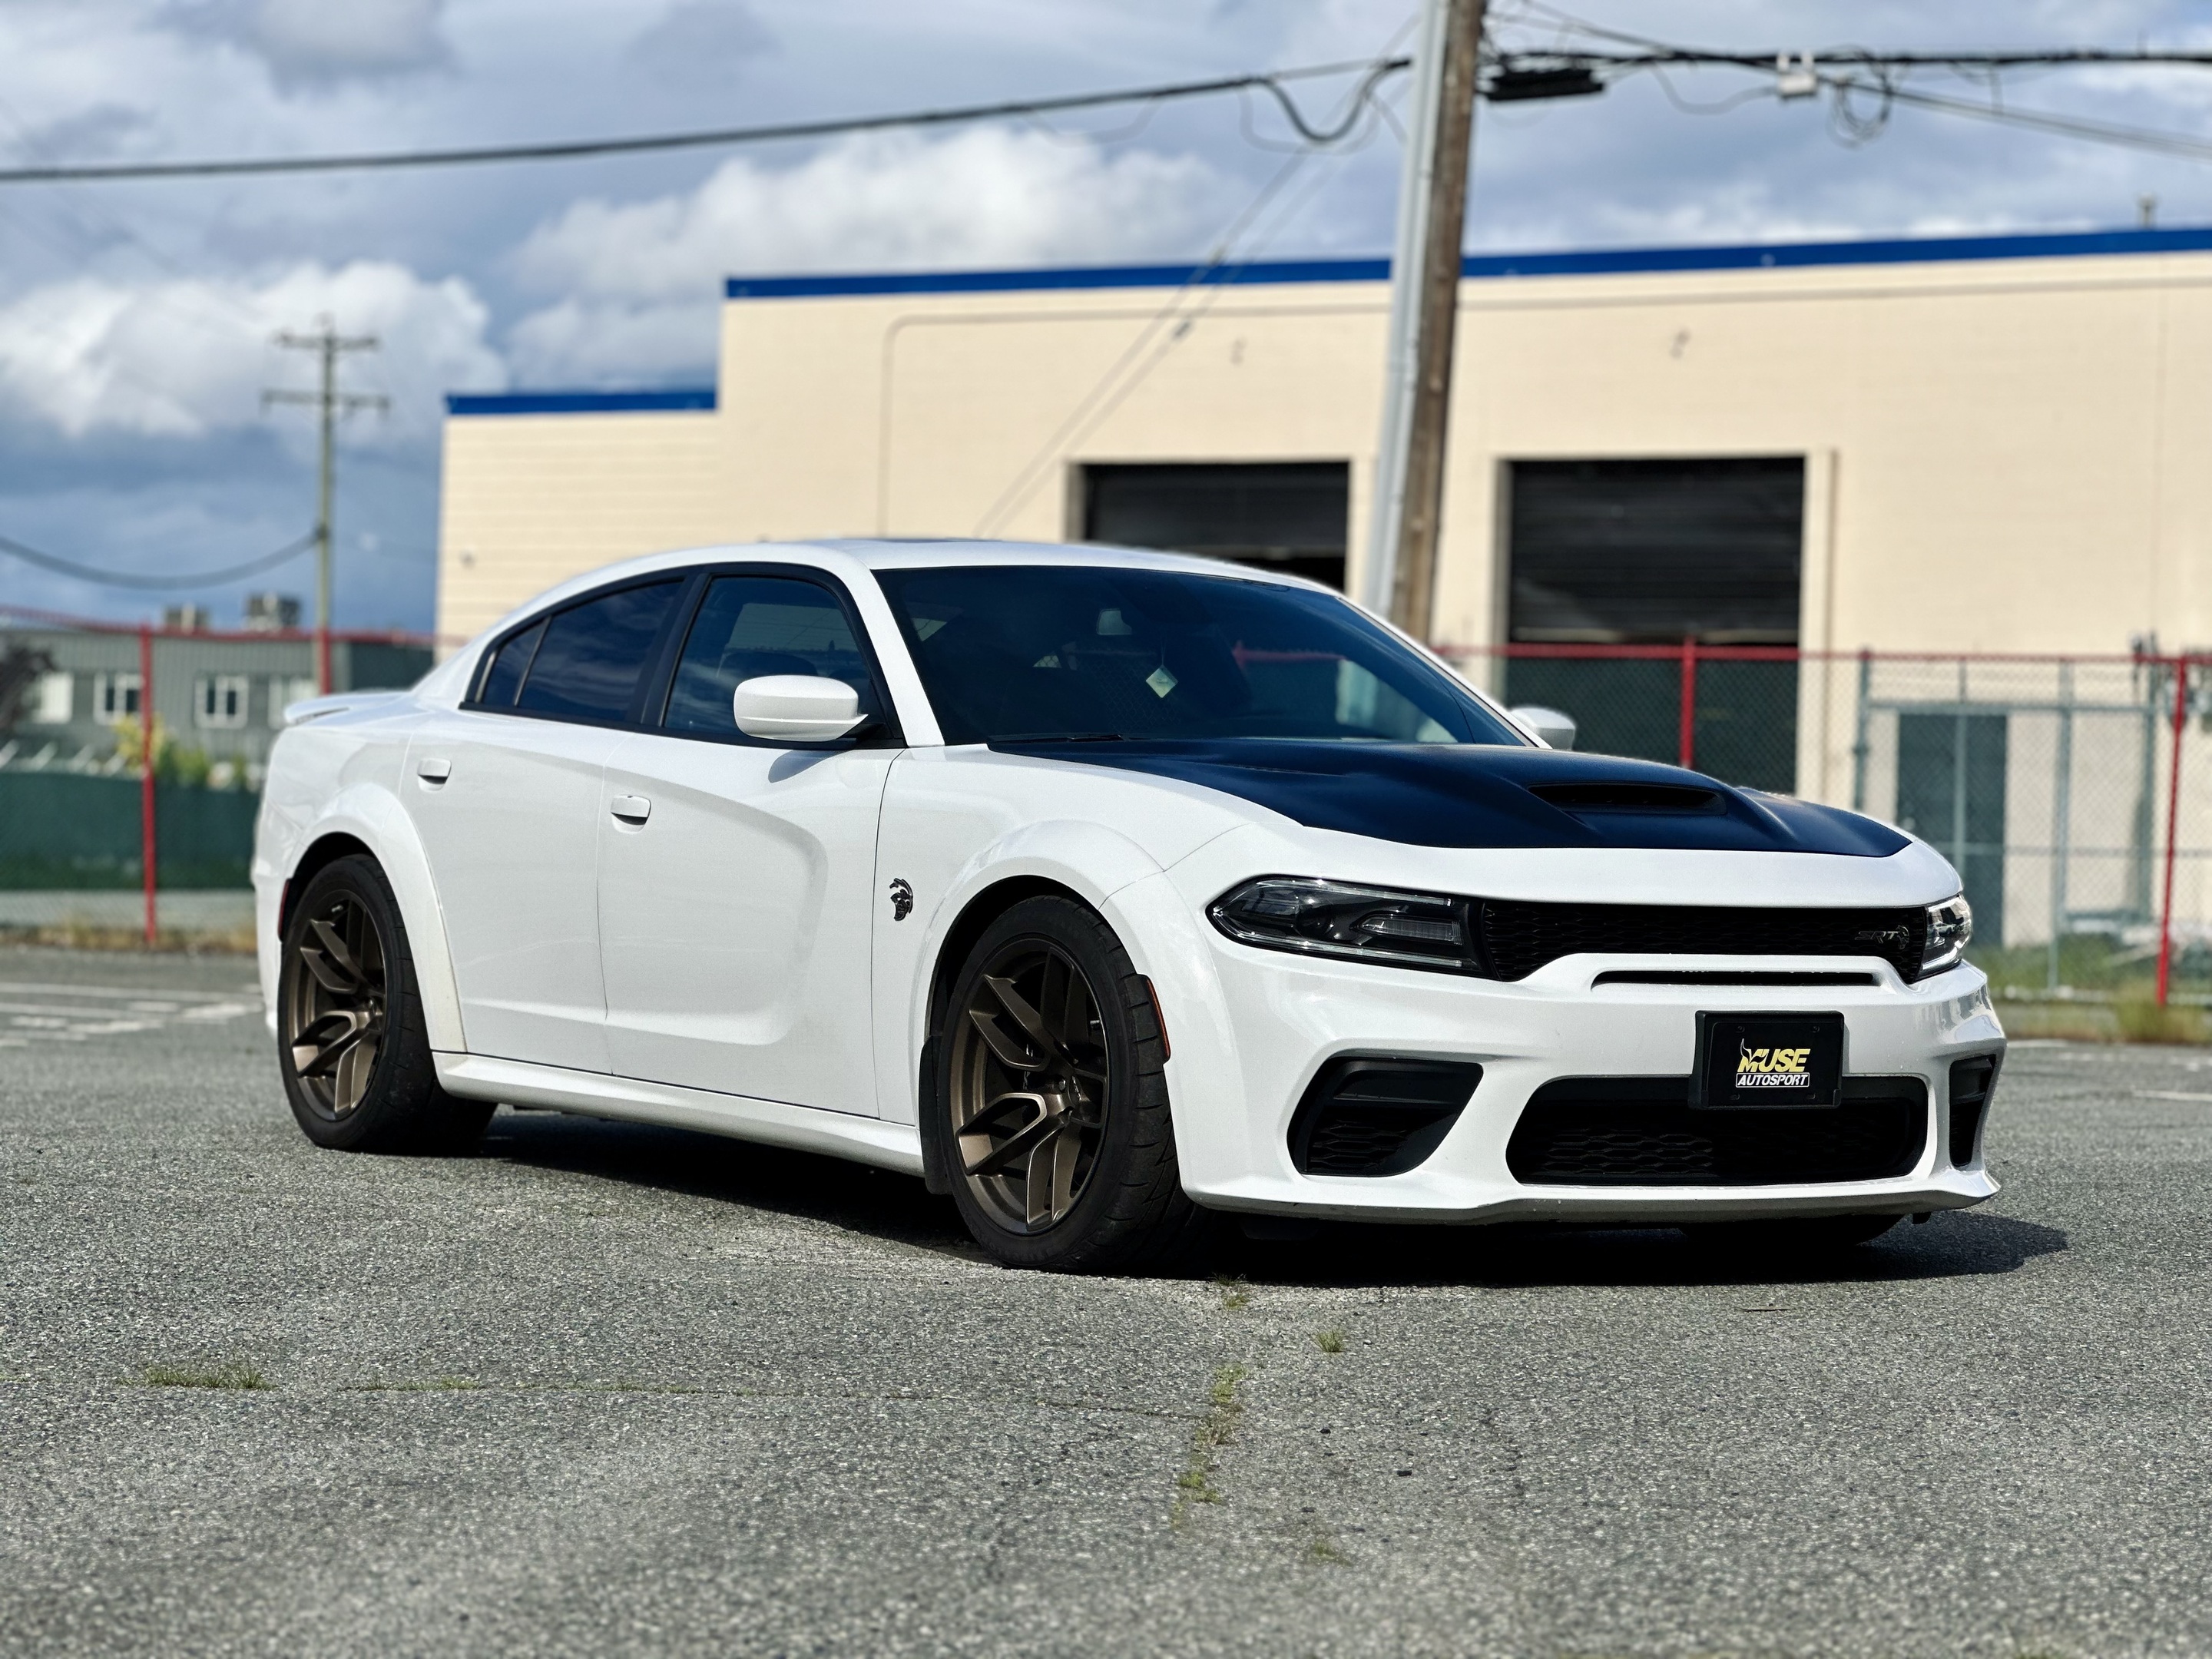 2021 Dodge Charger | 937HP FBO Upgraded No Accident